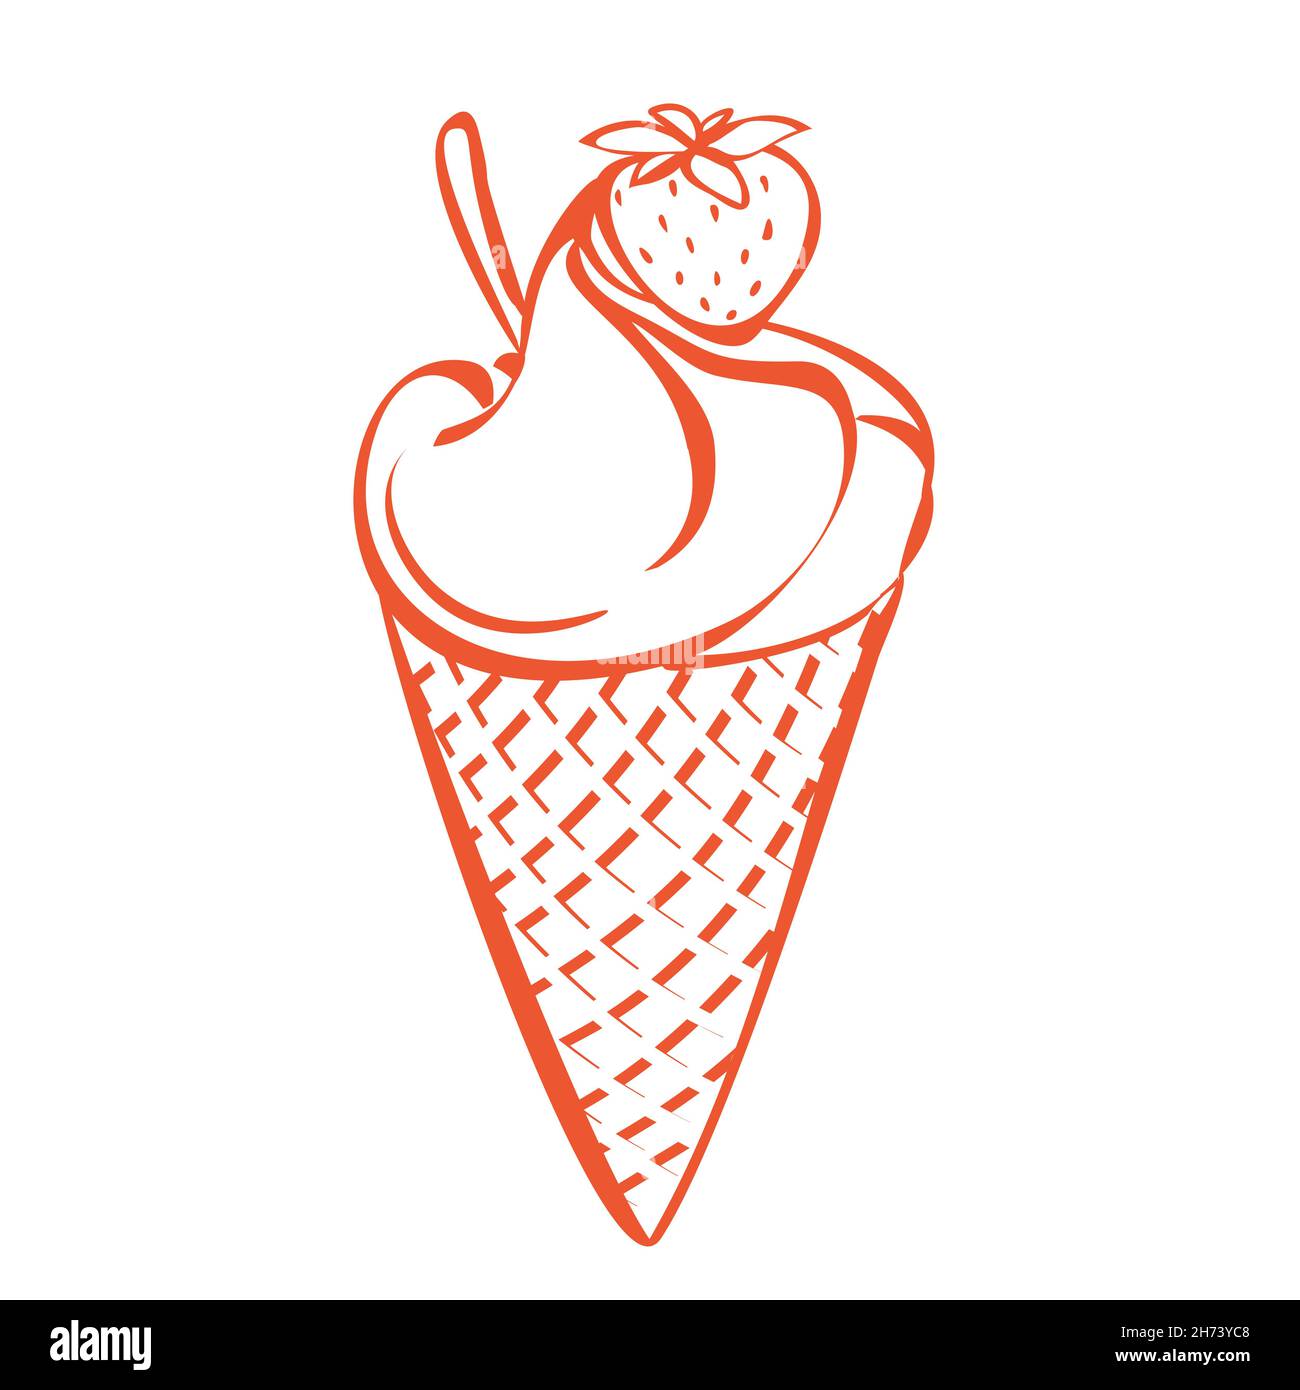 https://c8.alamy.com/comp/2H73YC8/ice-cream-with-strawberry-pink-countour-icecream-in-waffle-cup-hand-made-drawing-2H73YC8.jpg